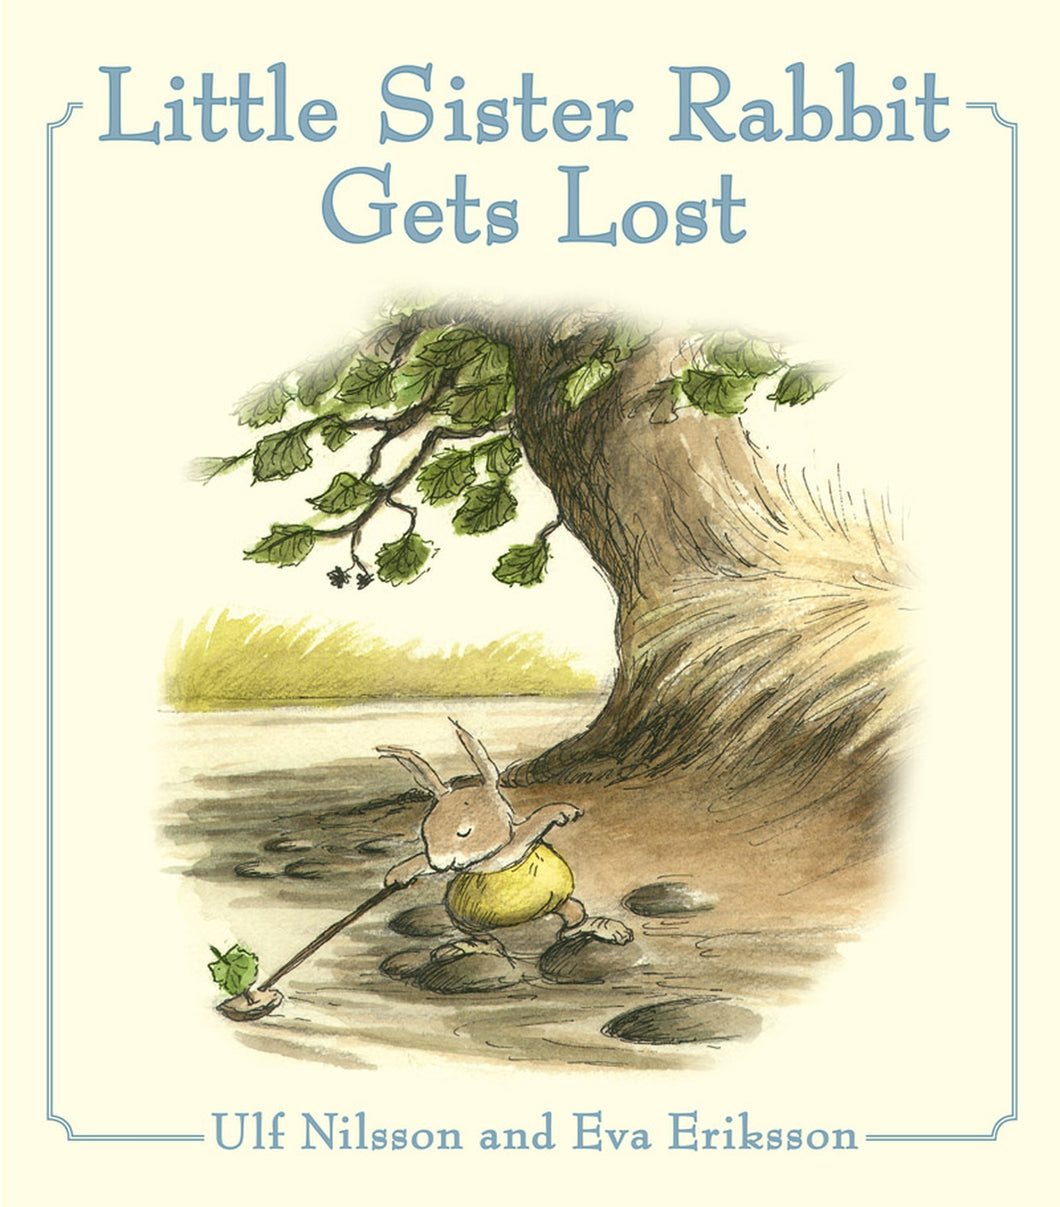 <i>Little Sister Rabbit Gets Lost</i> by Eva Eriksson and Ulf Nilsson